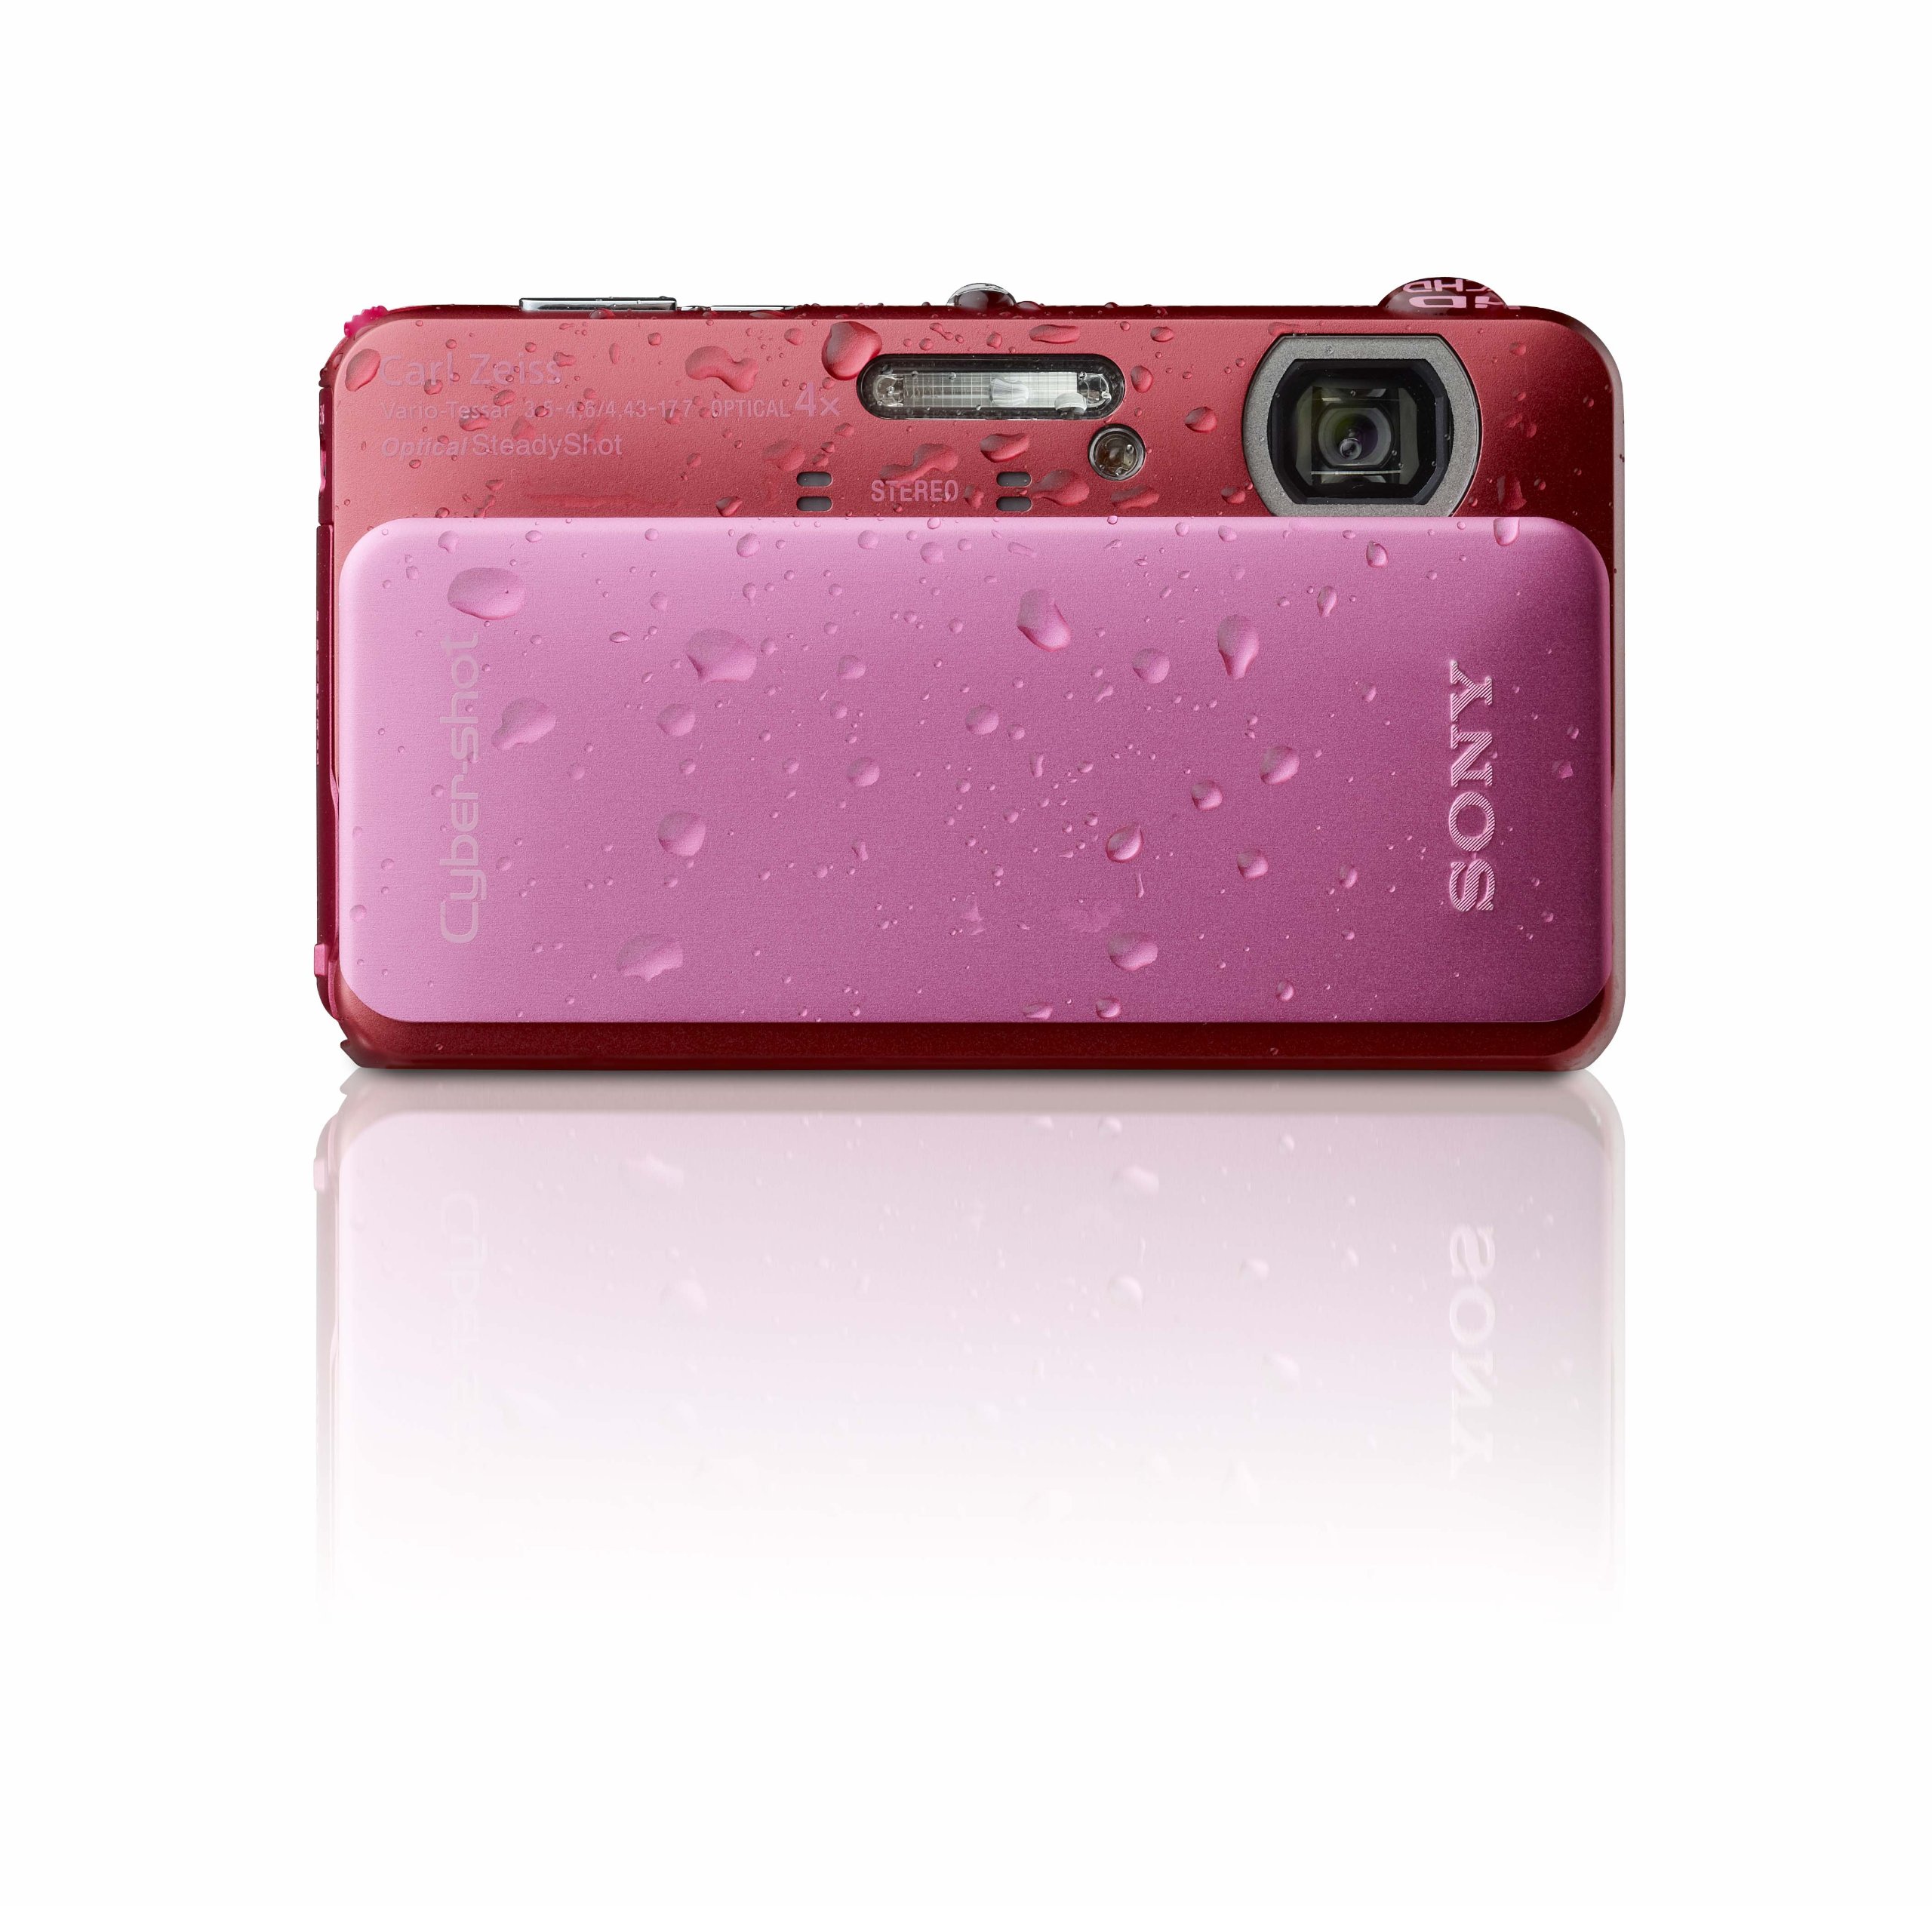 Sony Cyber-shot DSC-TX20 16.2 MP Exmor R CMOS Digital Camera with 4x Optical Zoom and 3.0-inch LCD (Pink) (2012 Model)